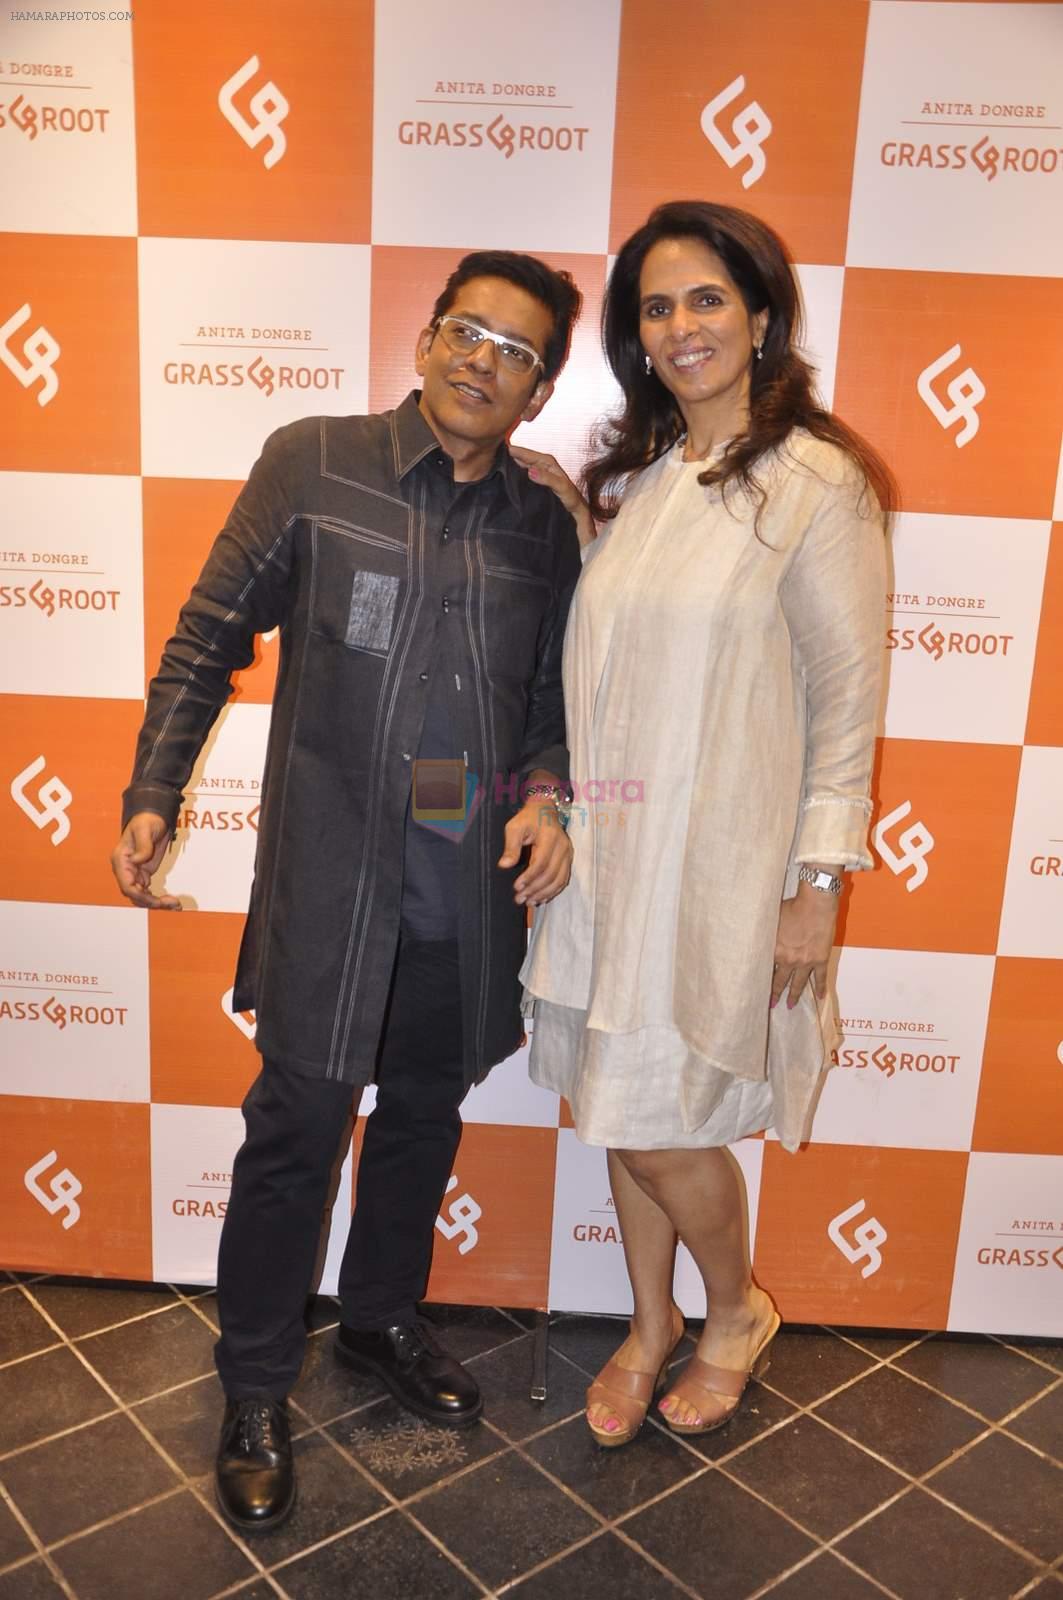 Anita Dongre's Grass Root store launch in Khar on 12th Aug 2015